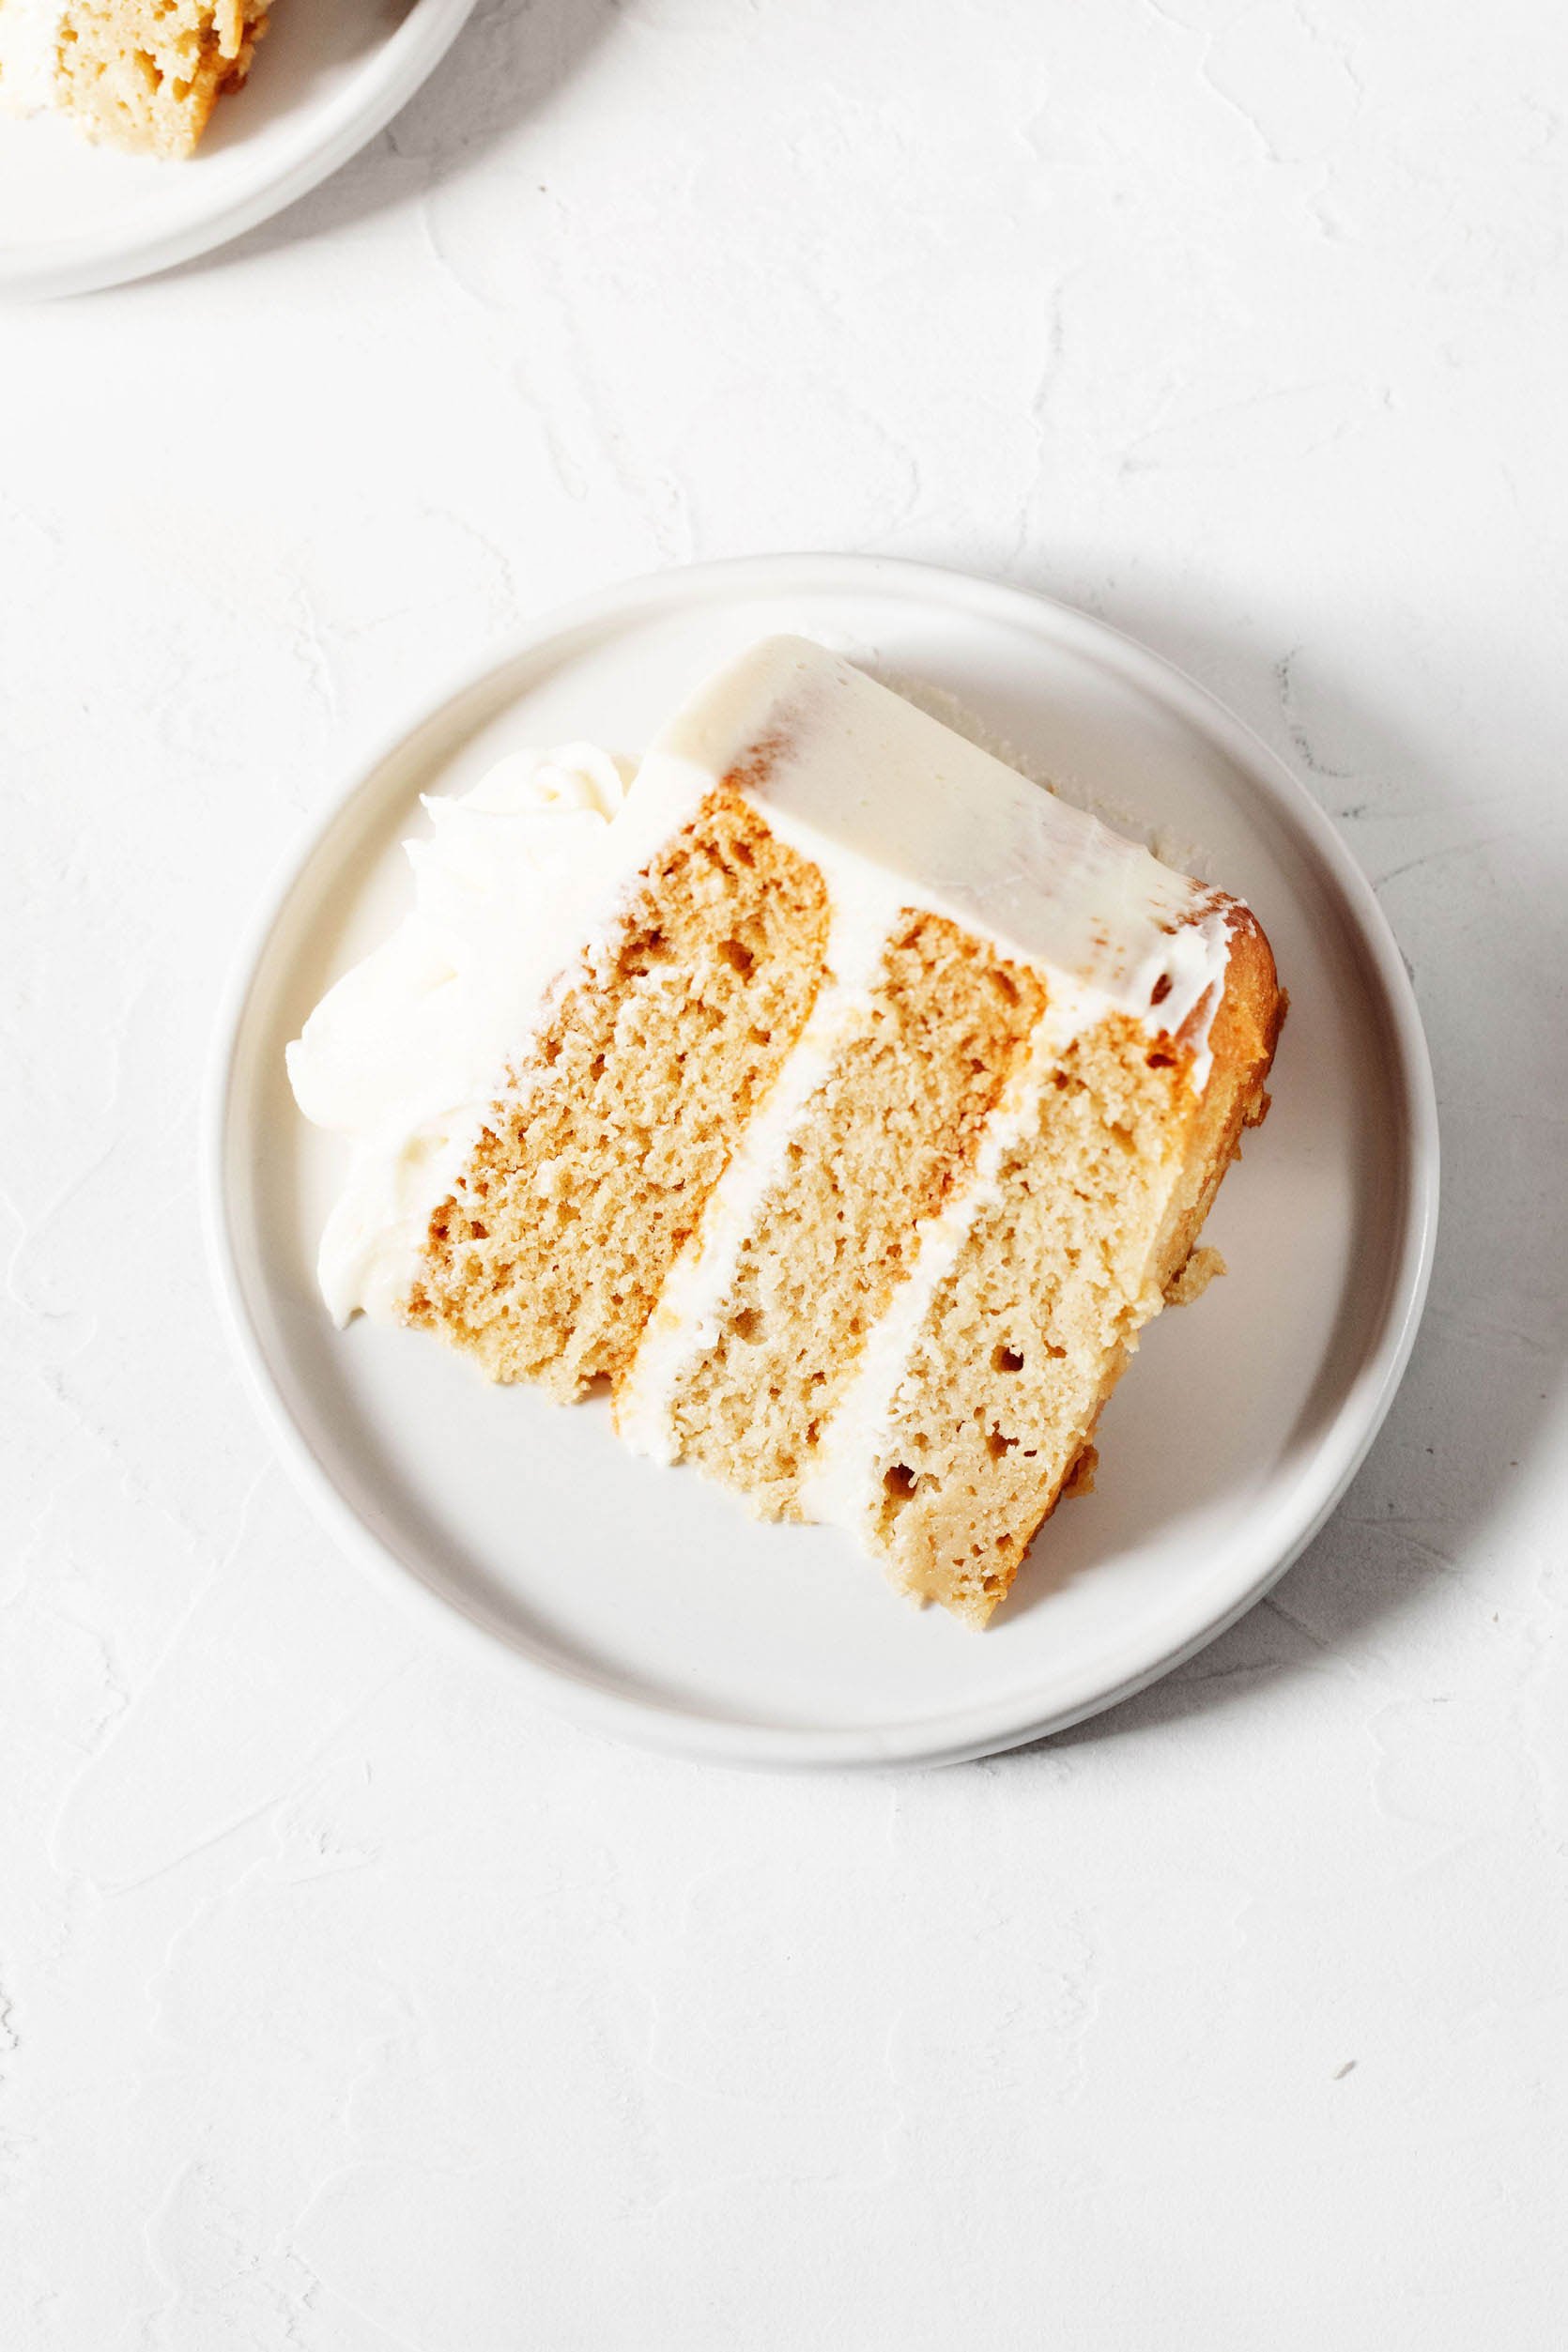 An overhead image of a slice of vegan vanilla cake, which has been sliced and placed onto a round dessert plate.